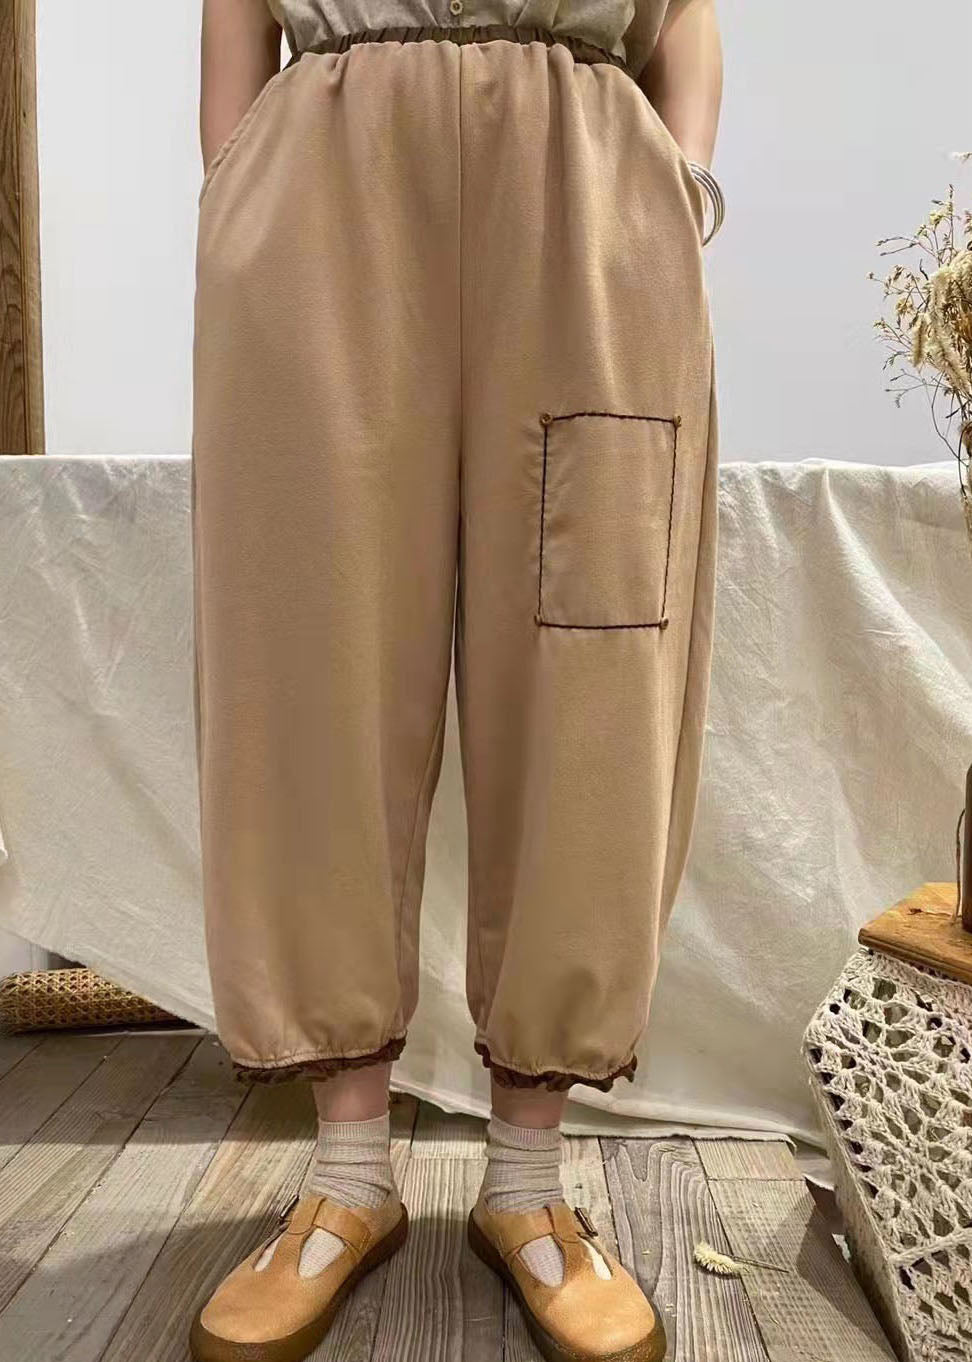 Modern Coffee Pockets Patchwork Cotton Pants Spring